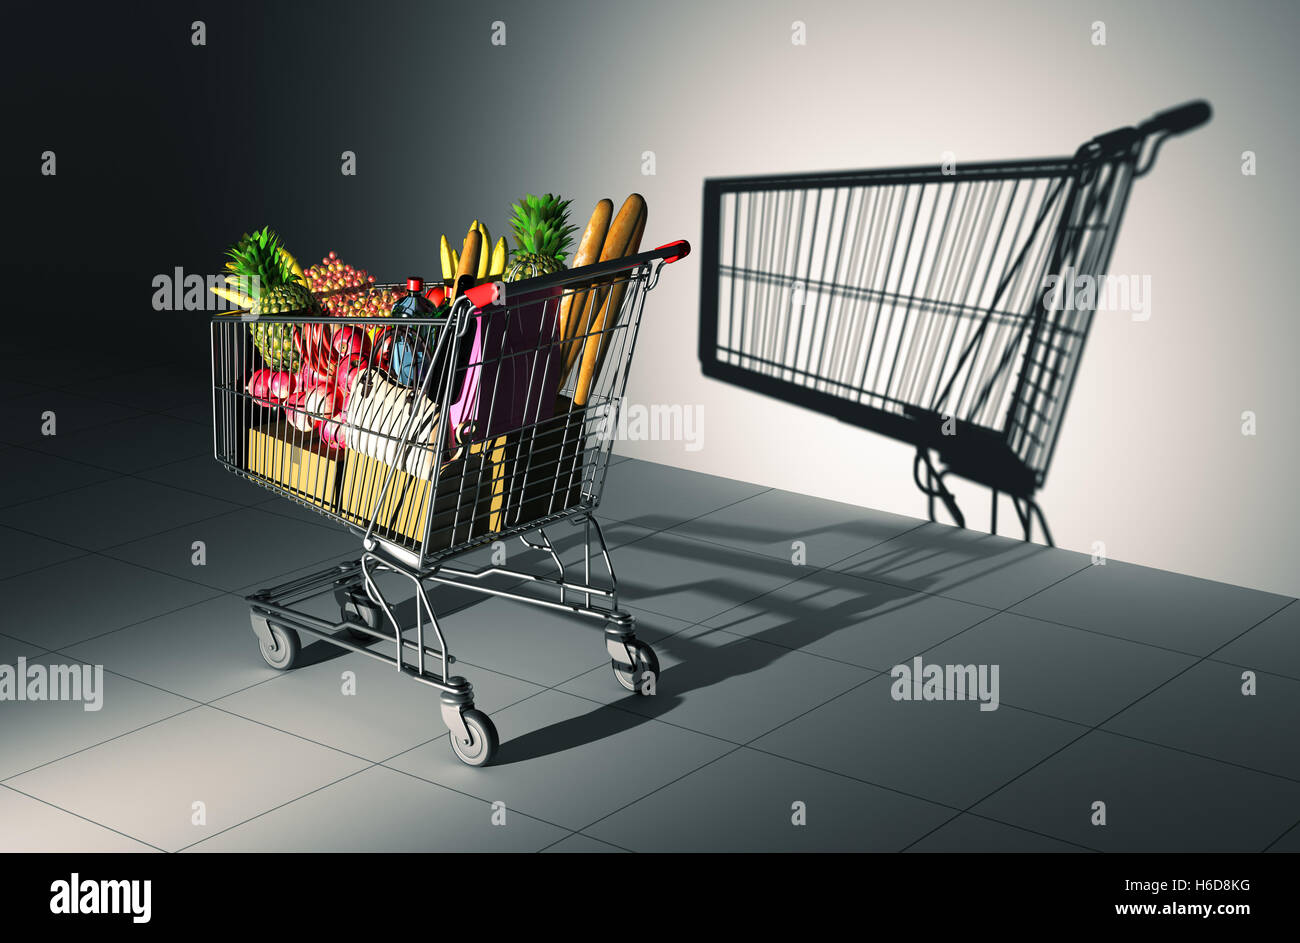 Full Shopping Cart Cast Shadow On The Wall As Empty Shopping Cart. 3D Illustration. Stock Photo